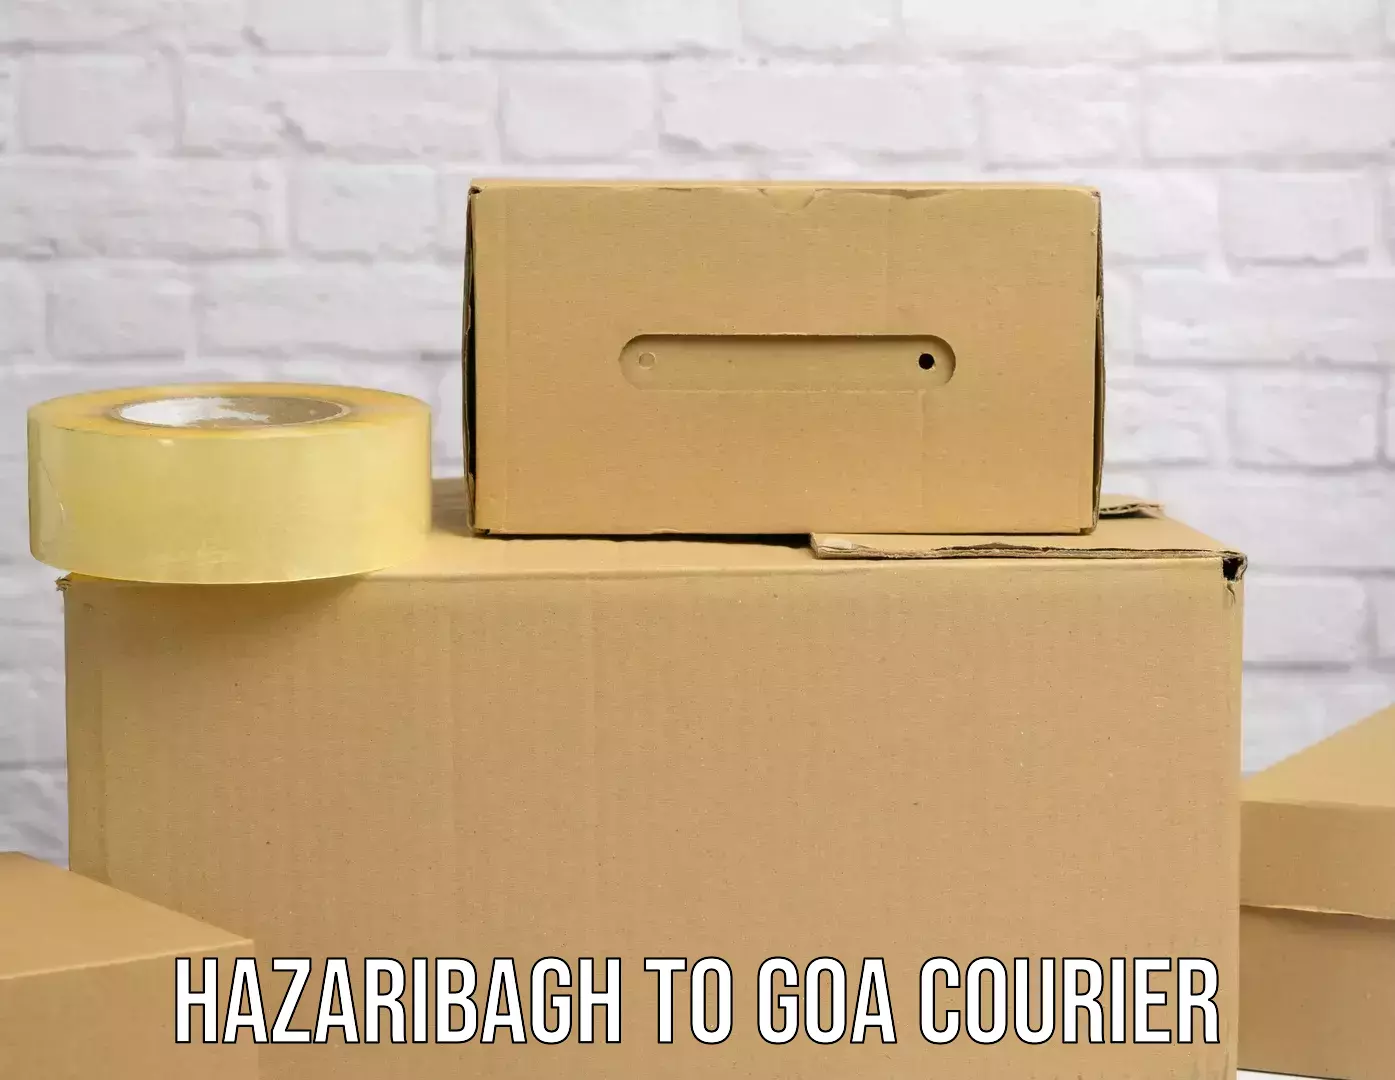 Quality courier partnerships Hazaribagh to Goa